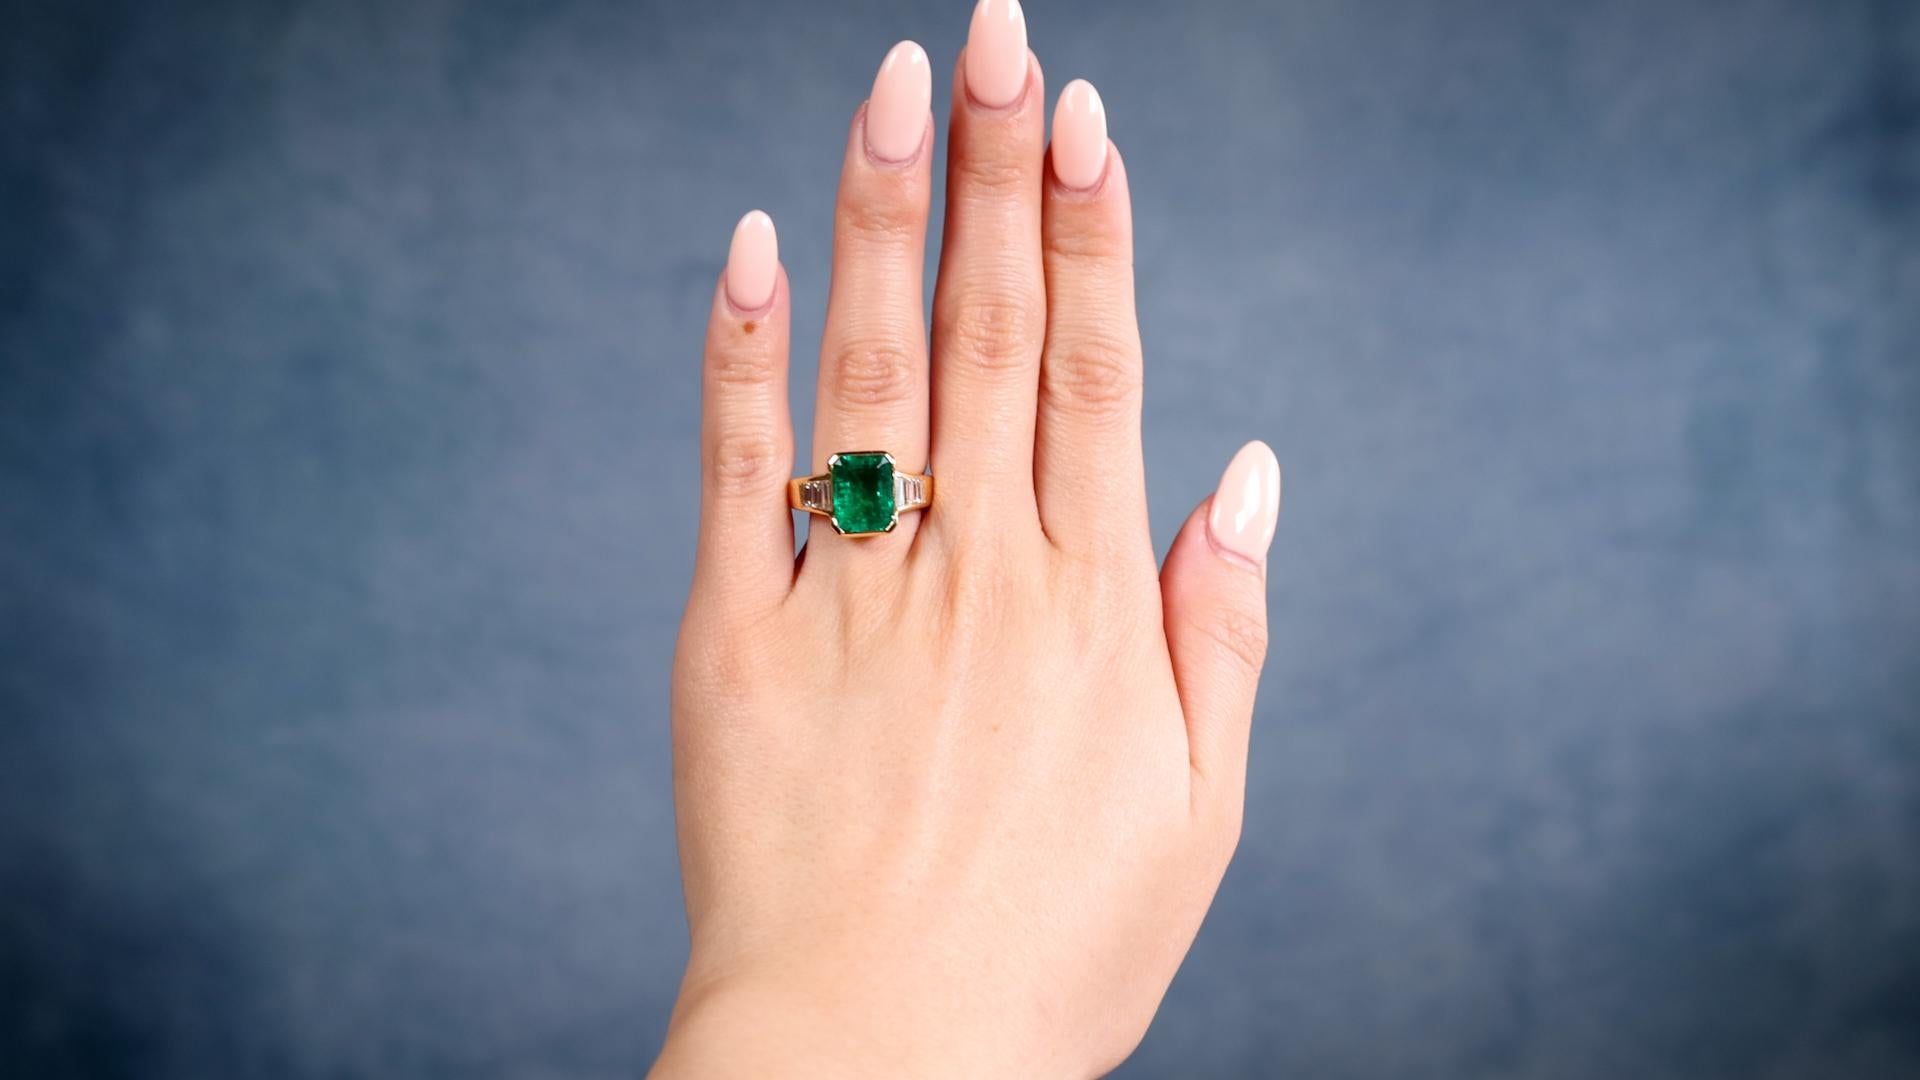 One Vintage French AGL Colombian Minor Oil Emerald 18k Yellow Gold Ring. Featuring one octagonal step cut emerald weighing approximately 3.05 carats, accompanied by AGL #1138264 stating the emerald is of Colombian origin with minor oil treatments.